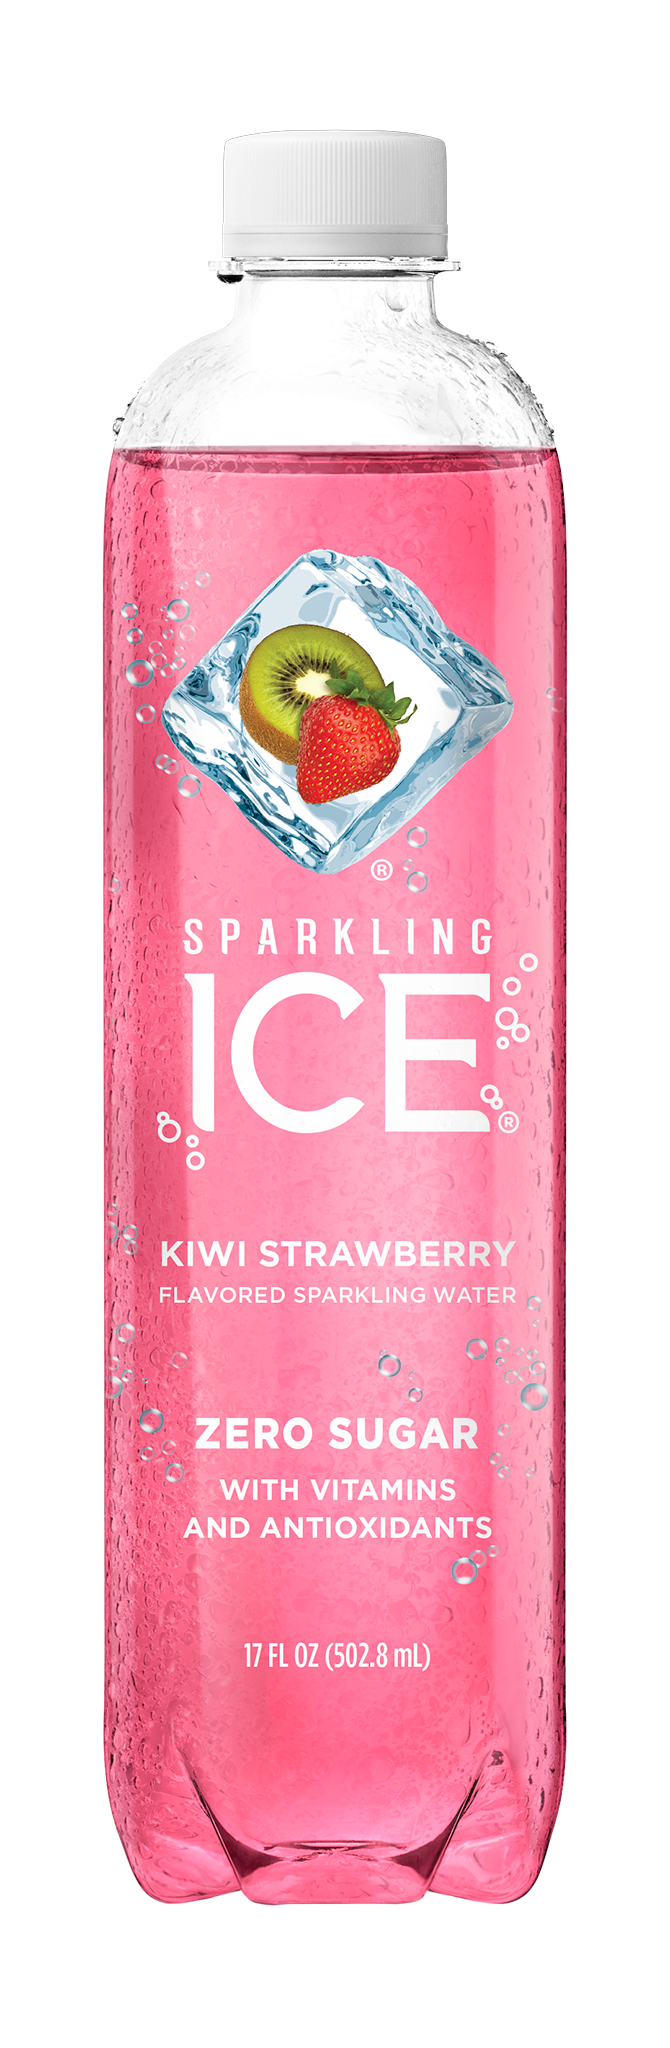 SPARKLING ICE FLAVORED SPARKLING WATER (KIWI STRAWBERRY, 502.8 ML)